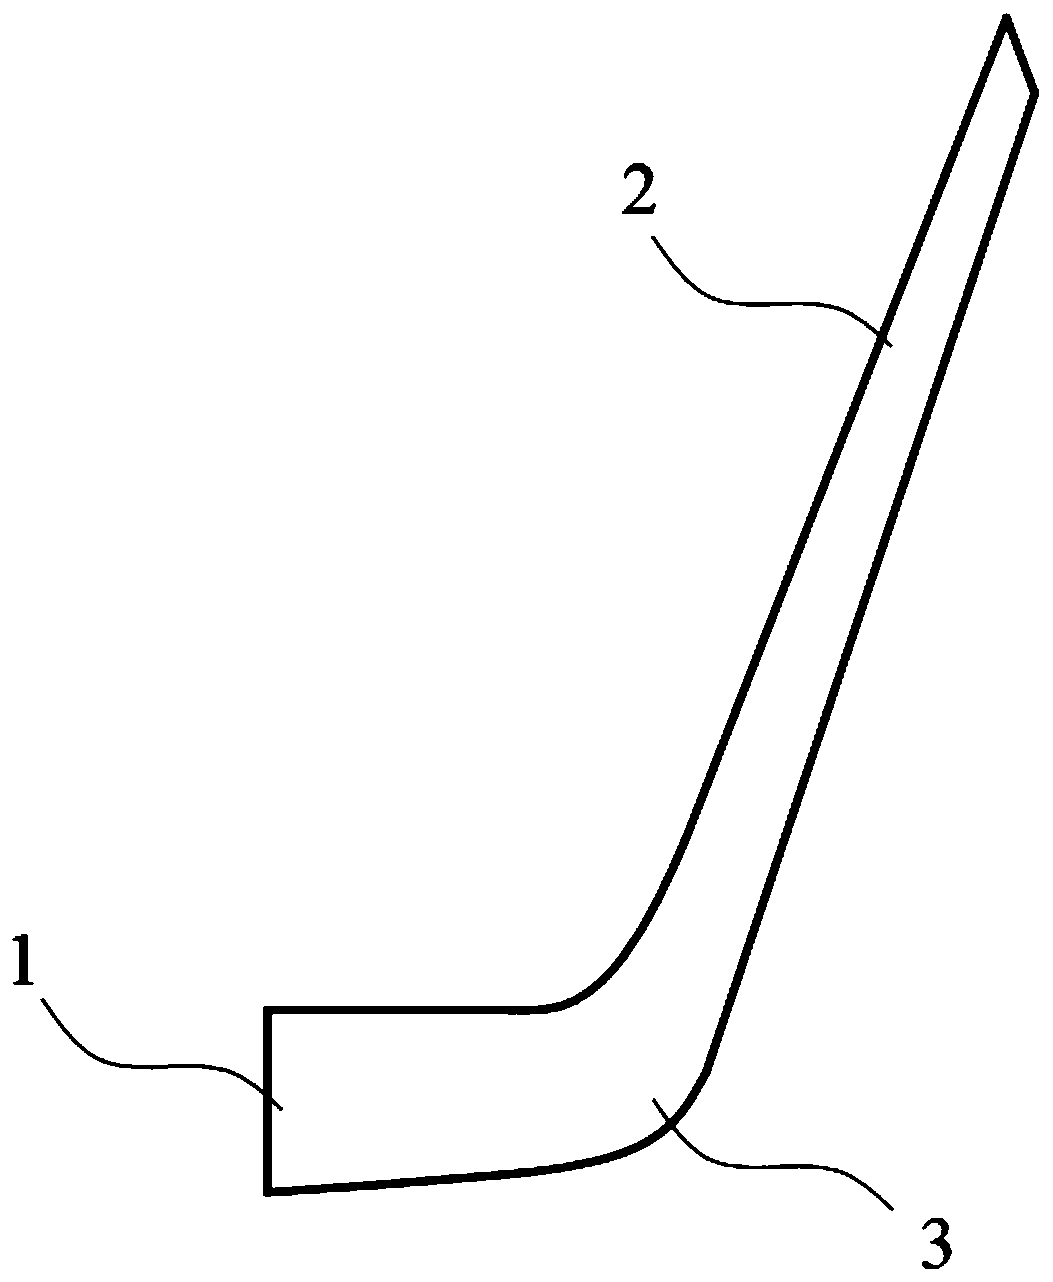 Blade tip winglet, wind turbine blade and blade synergy calculation method